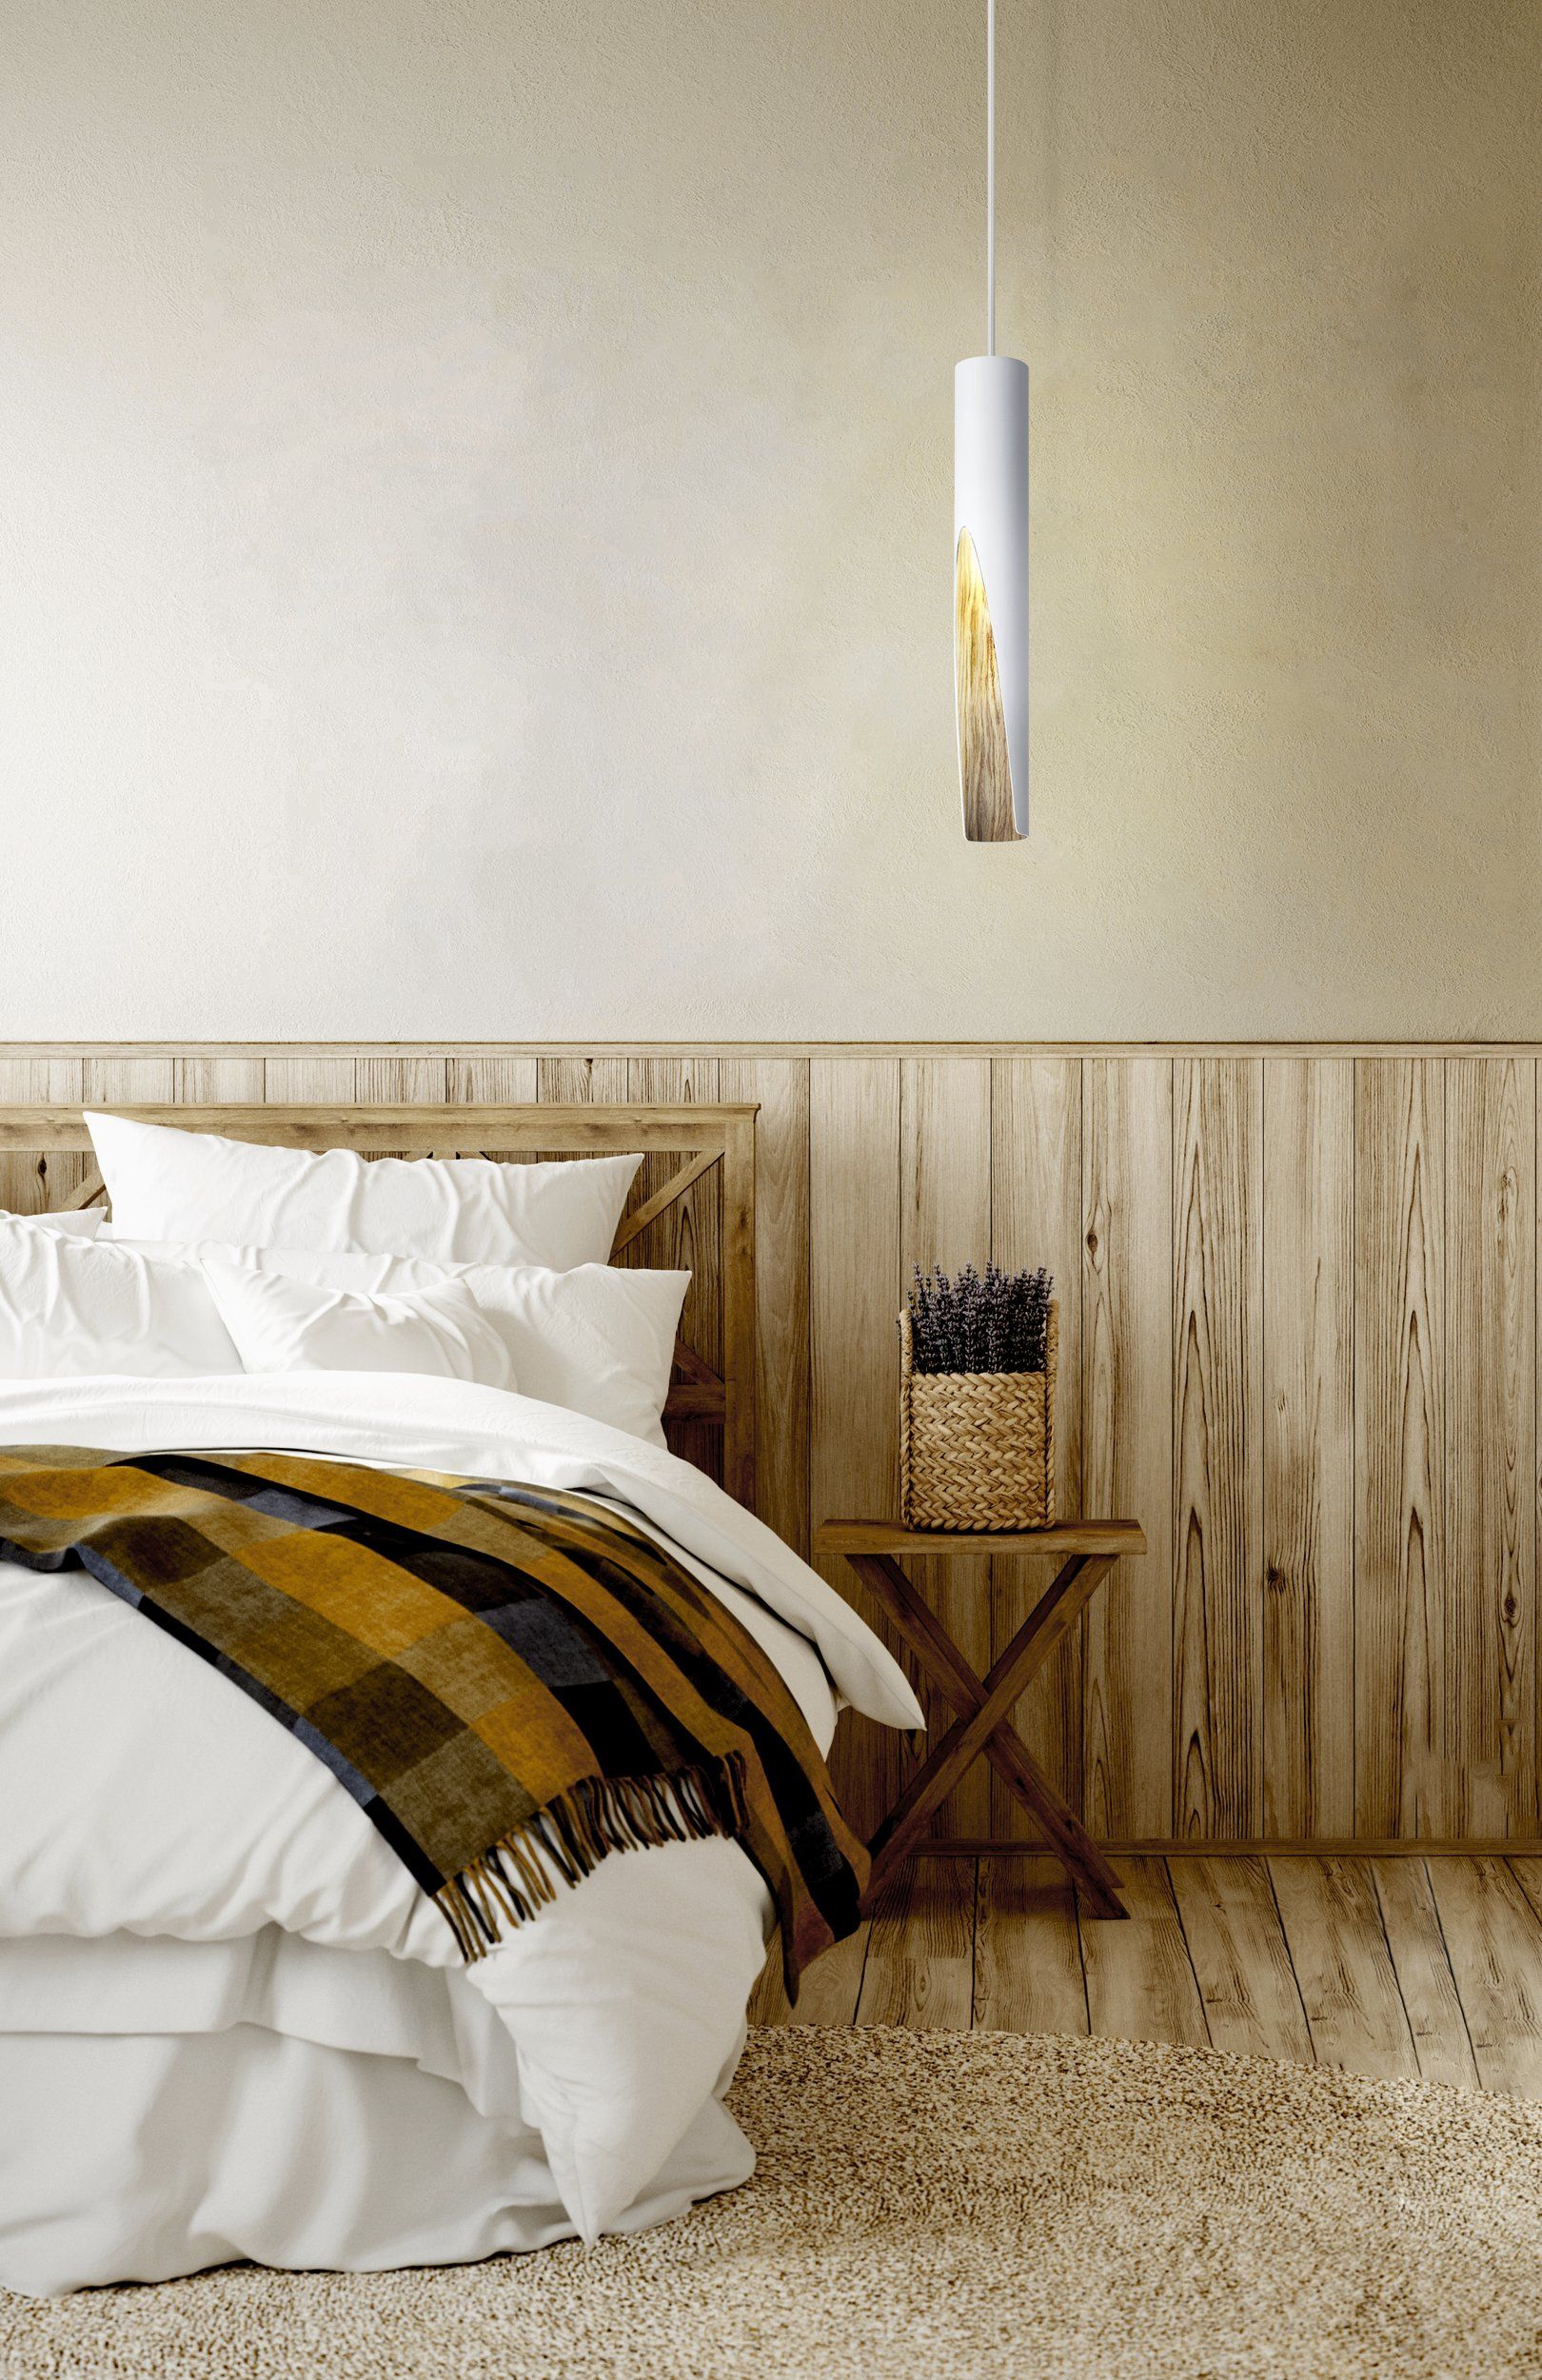 Barbotto White and Timber Cylindrical Pendant